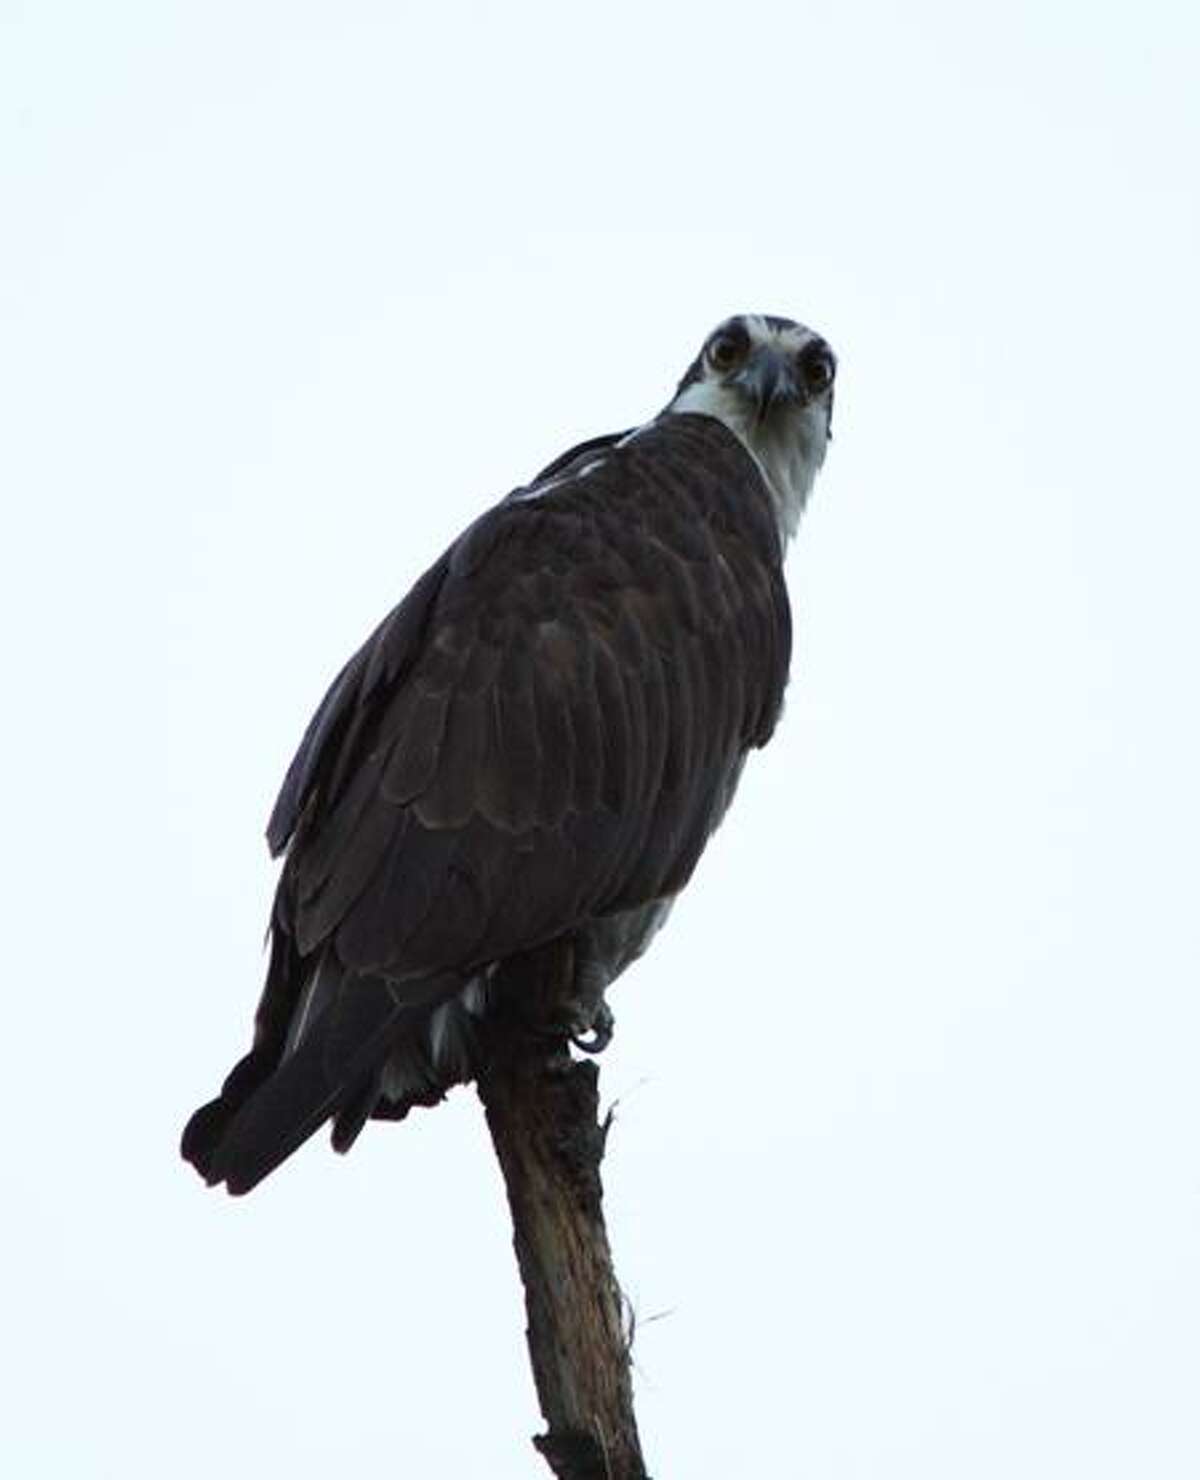 OVERNIGHT GUEST: Donna Lorello of Branford writes, "I had this male osprey decide to roost in my backyard over the last two nights in a dead tree. In all my years living in the same house, I've had these birds fly over during migration or while seeking water to fish from, but this is the first time one has roosted. TAKE YOUR BEST SHOT Readers are invited to send their nature photos and comments to features@nhregister.com or post them on our Facebook fan page, www.facebook.com/newhavenregister